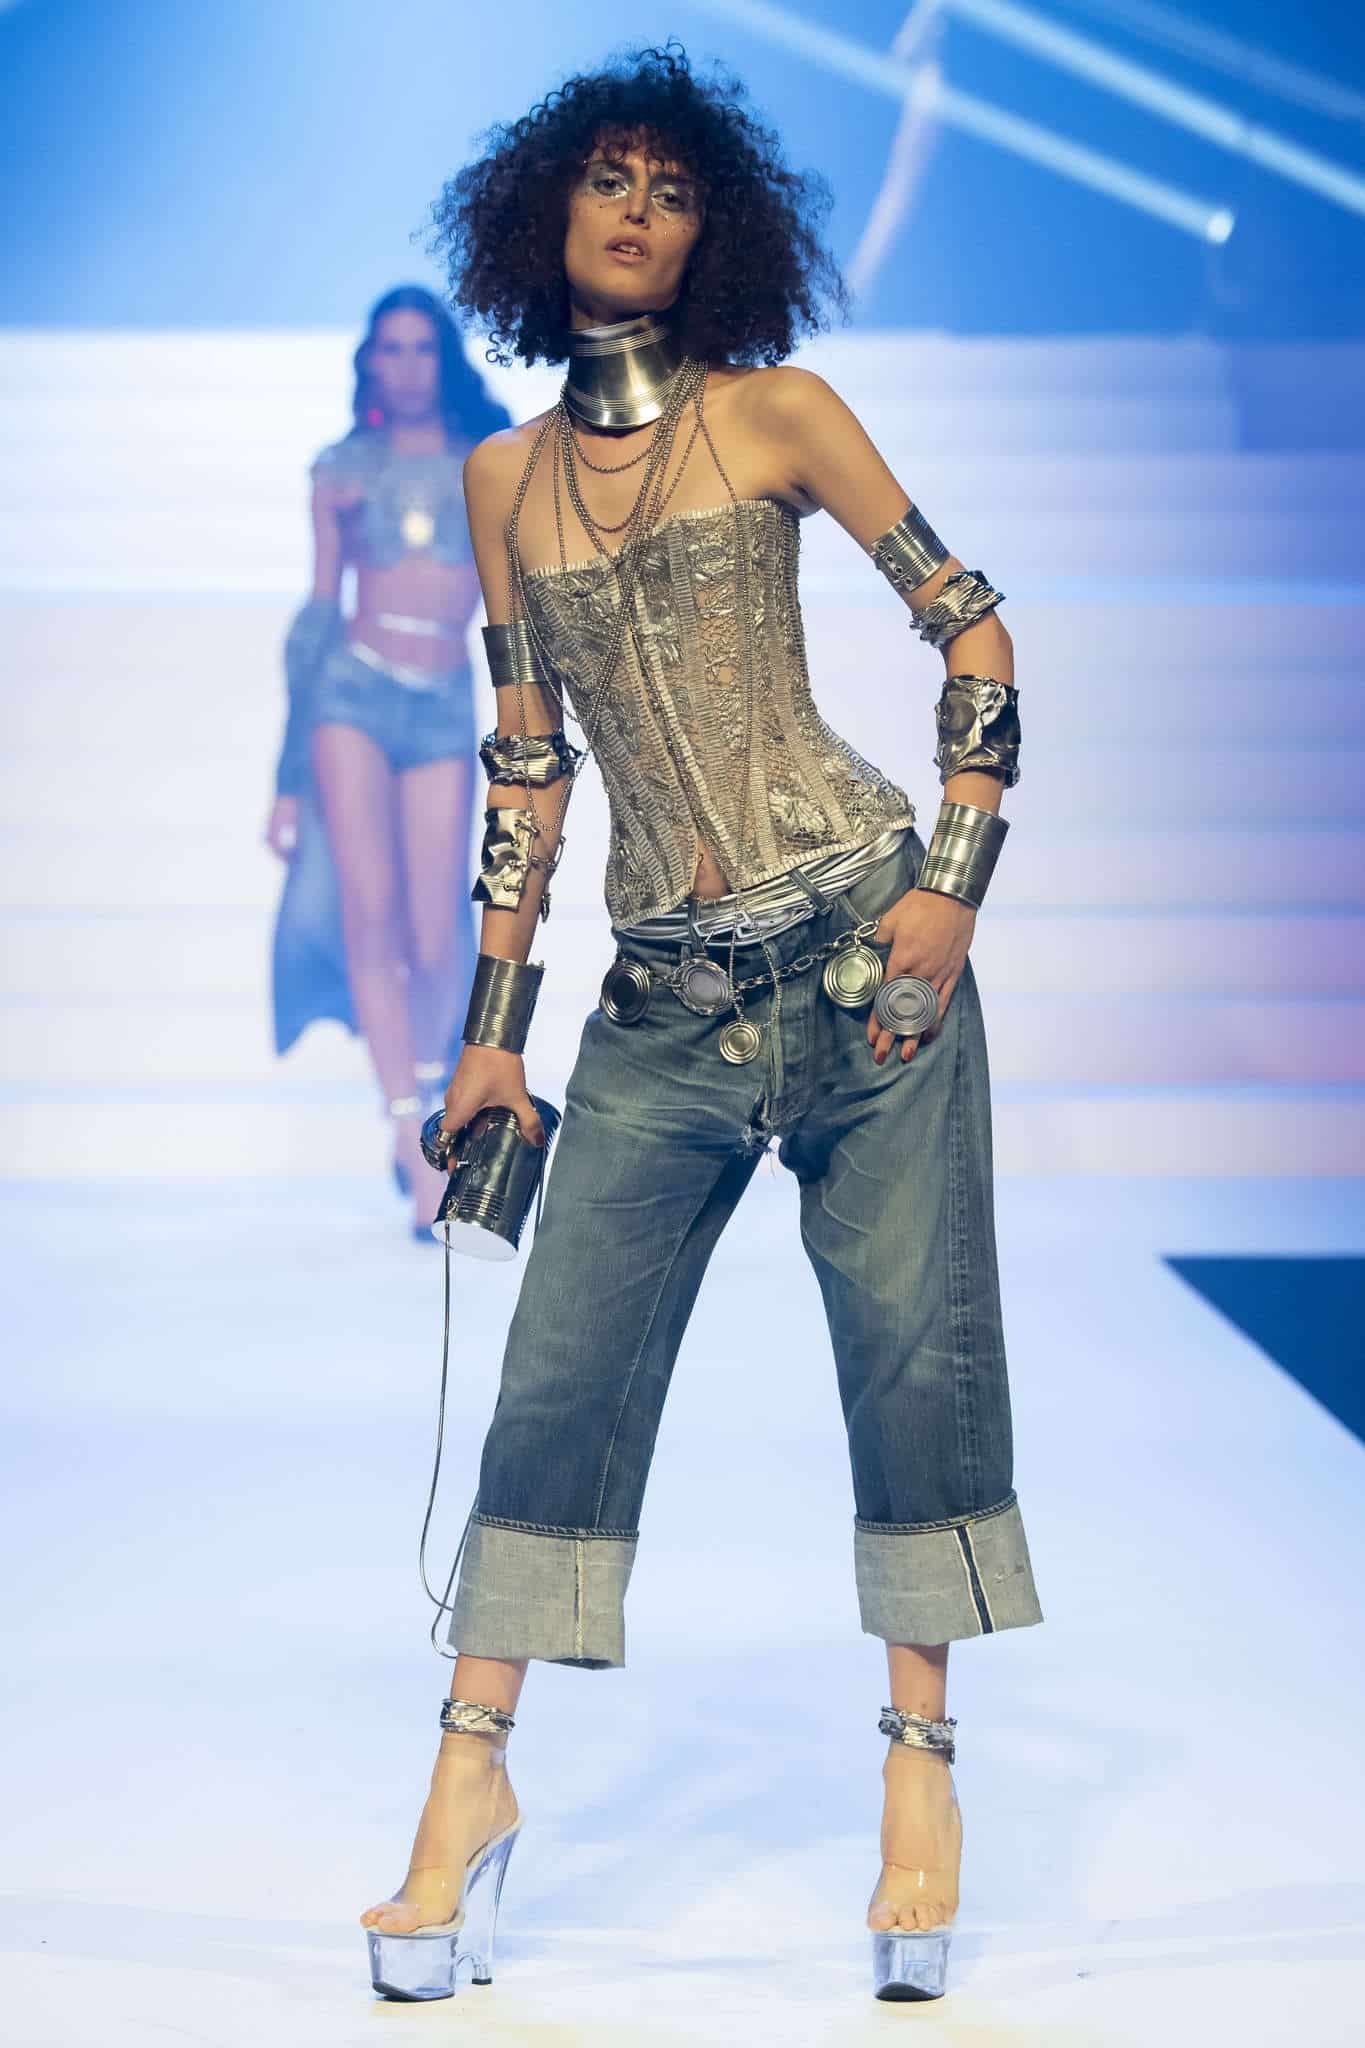 Jean Paul Gaultier's Upcycled Couture collection